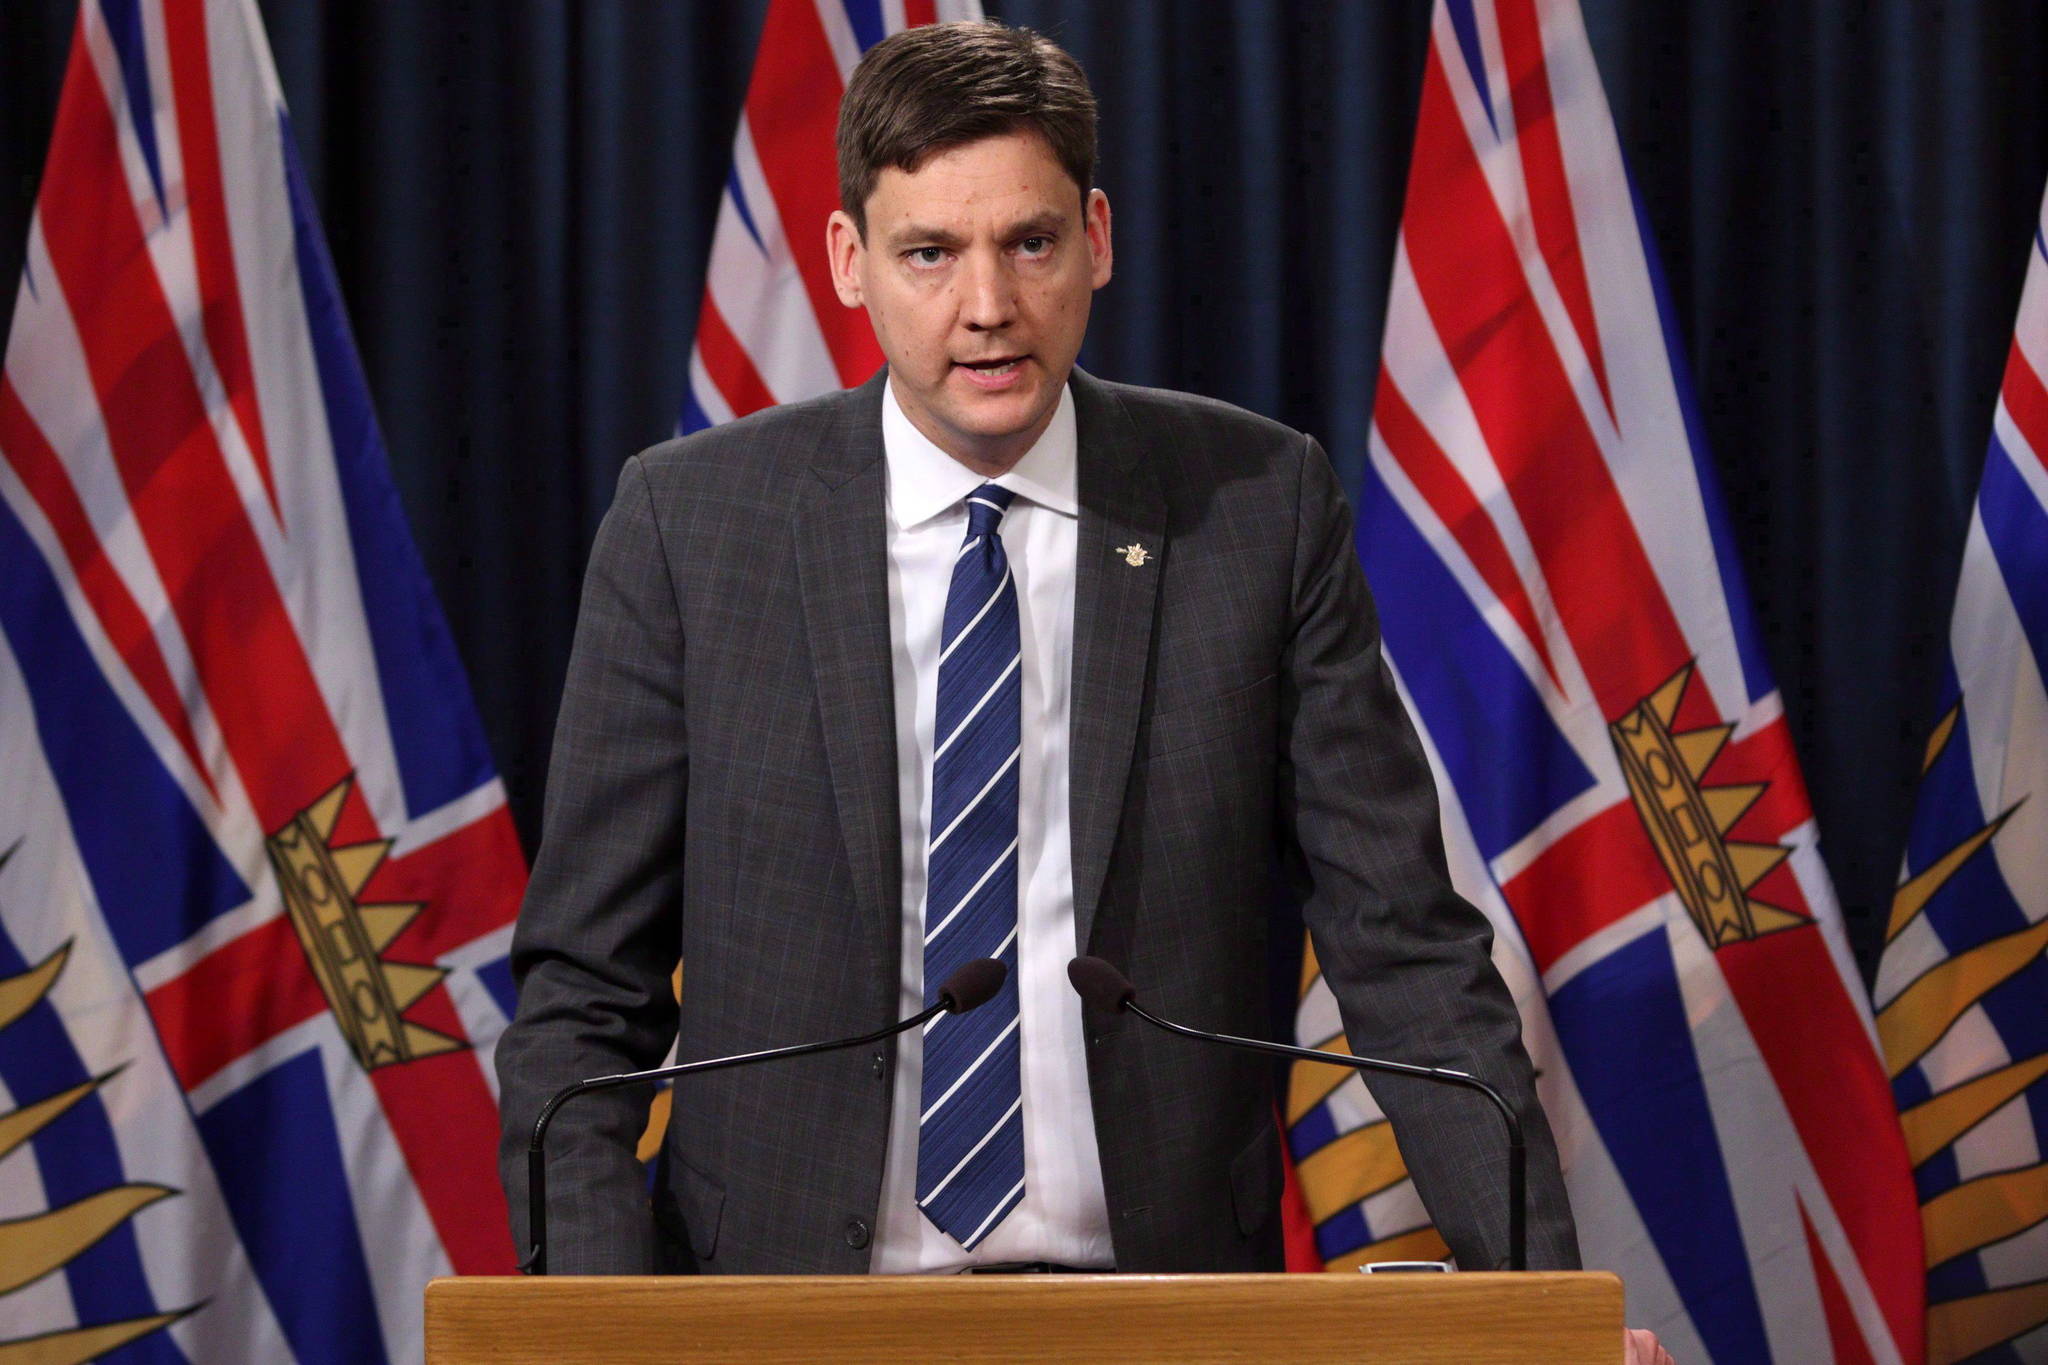 B.C. Attorney General David Eby is pictured in this 2018 file photo. THE CANADIAN PRESS/Chad Hipolito